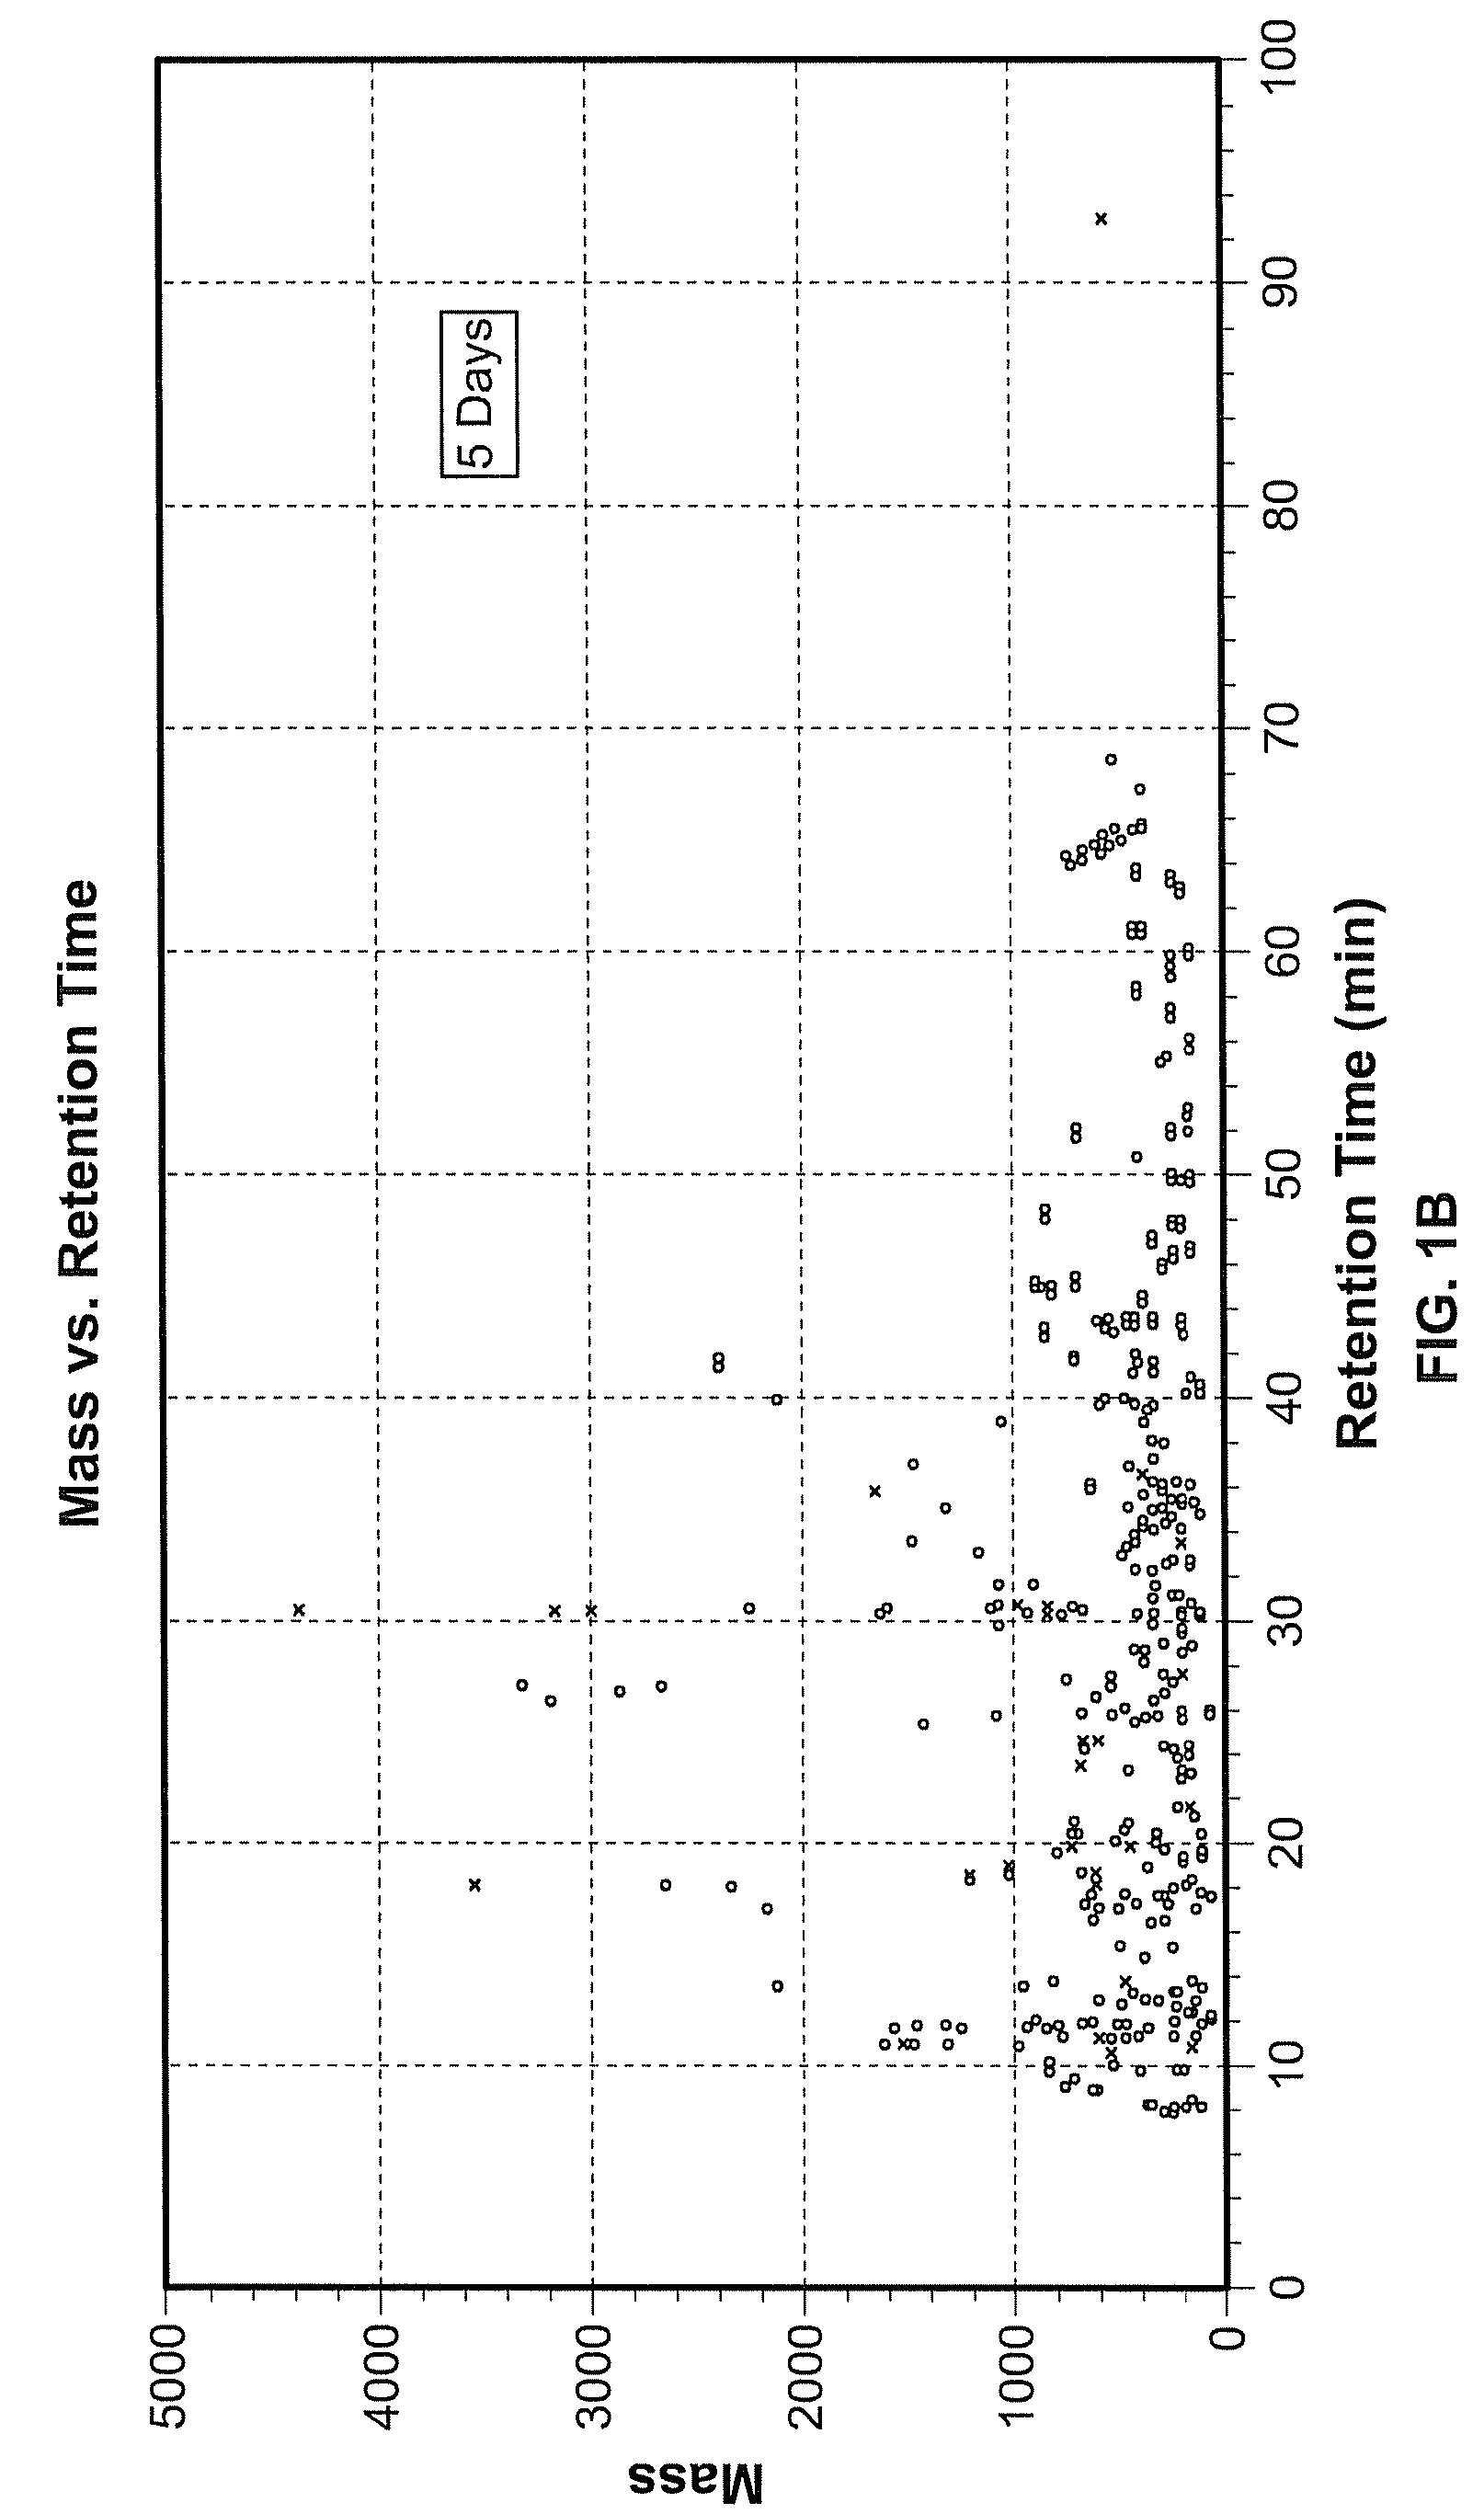 Reagents and methods for using human embryonic stem cells to evaluate toxicity of pharmaceutical compounds and other chemicals